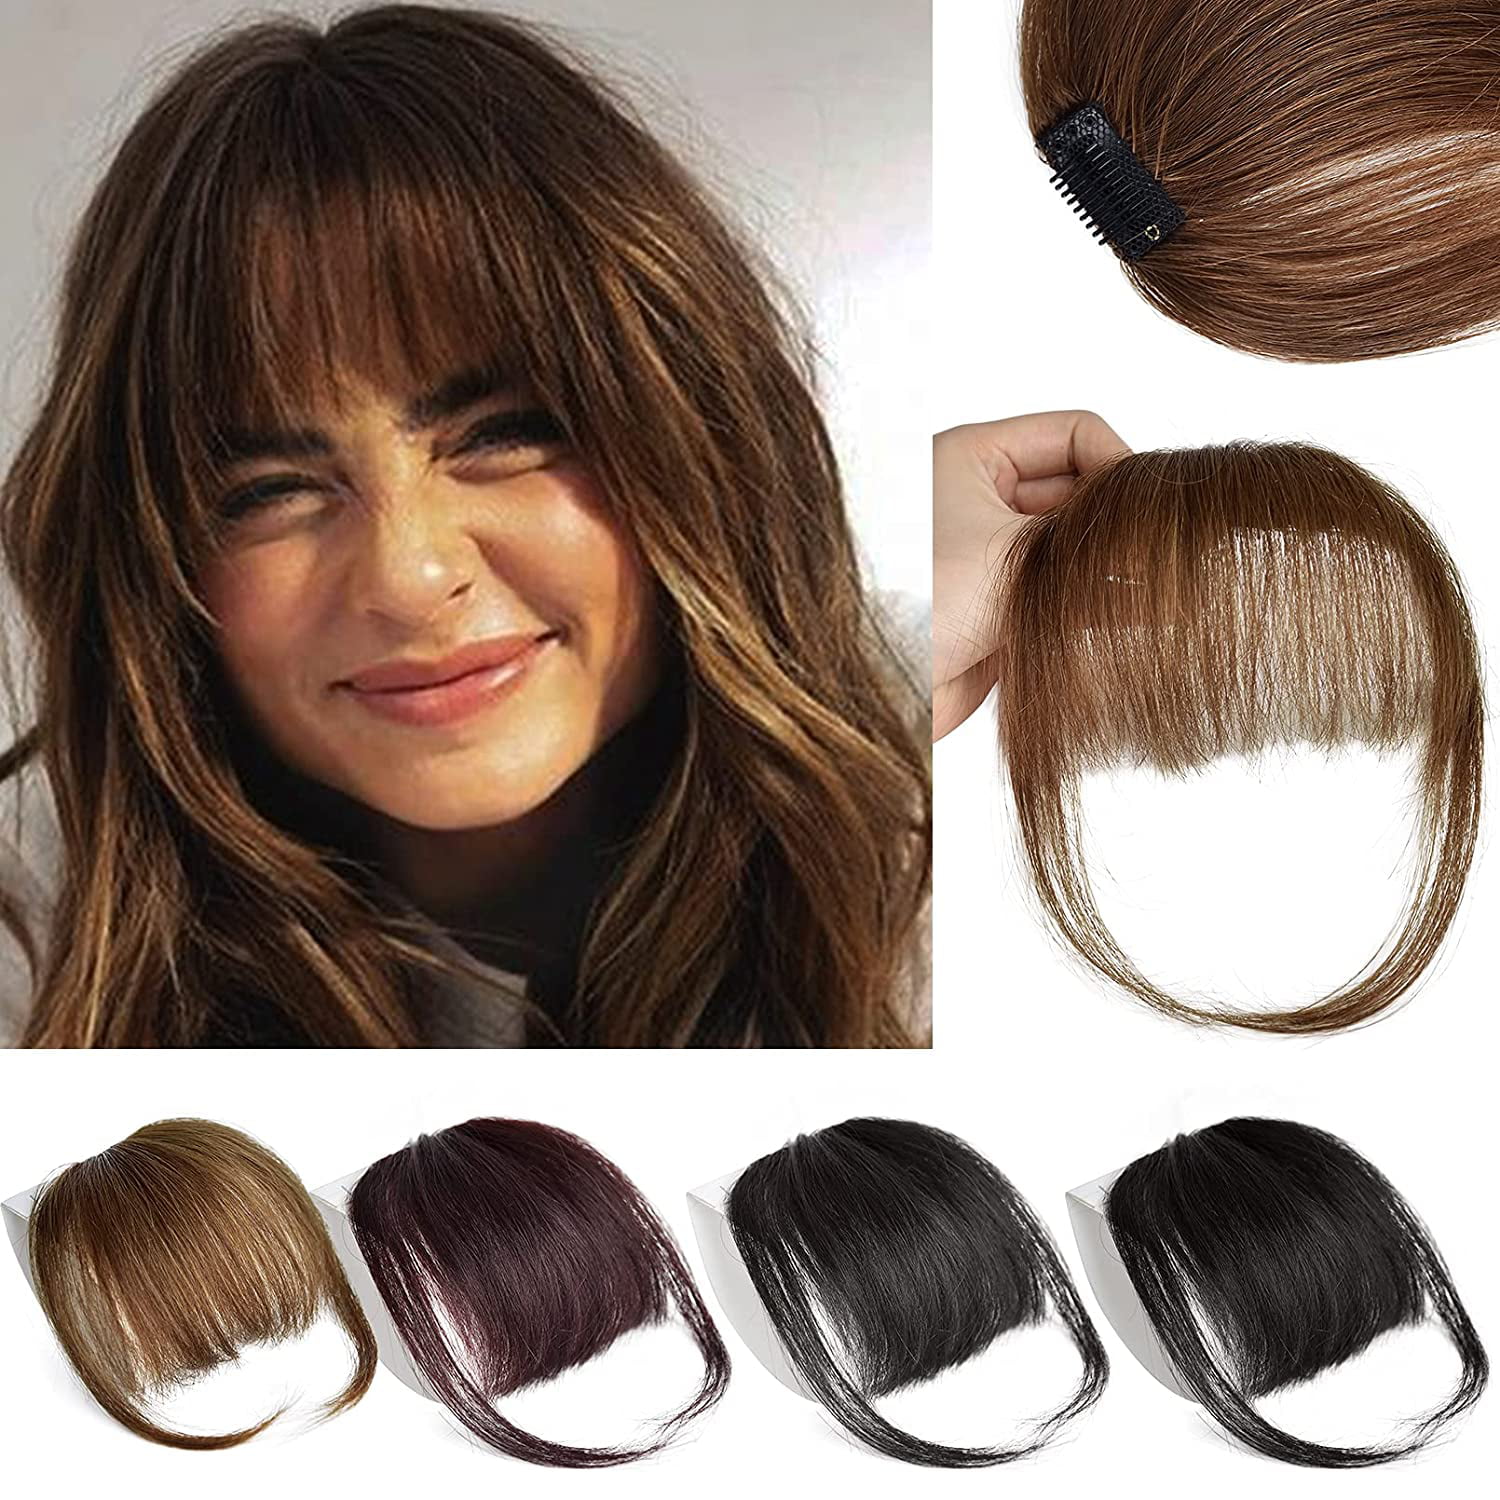 Bangs Hair Clip in Bangs Human Hair Air Bangs with Temples Hair Pieces for  Women Clip on Fringe Bangs Flat Neat Bangs Hair Extension for Daily Wear  Party - Light Brown |